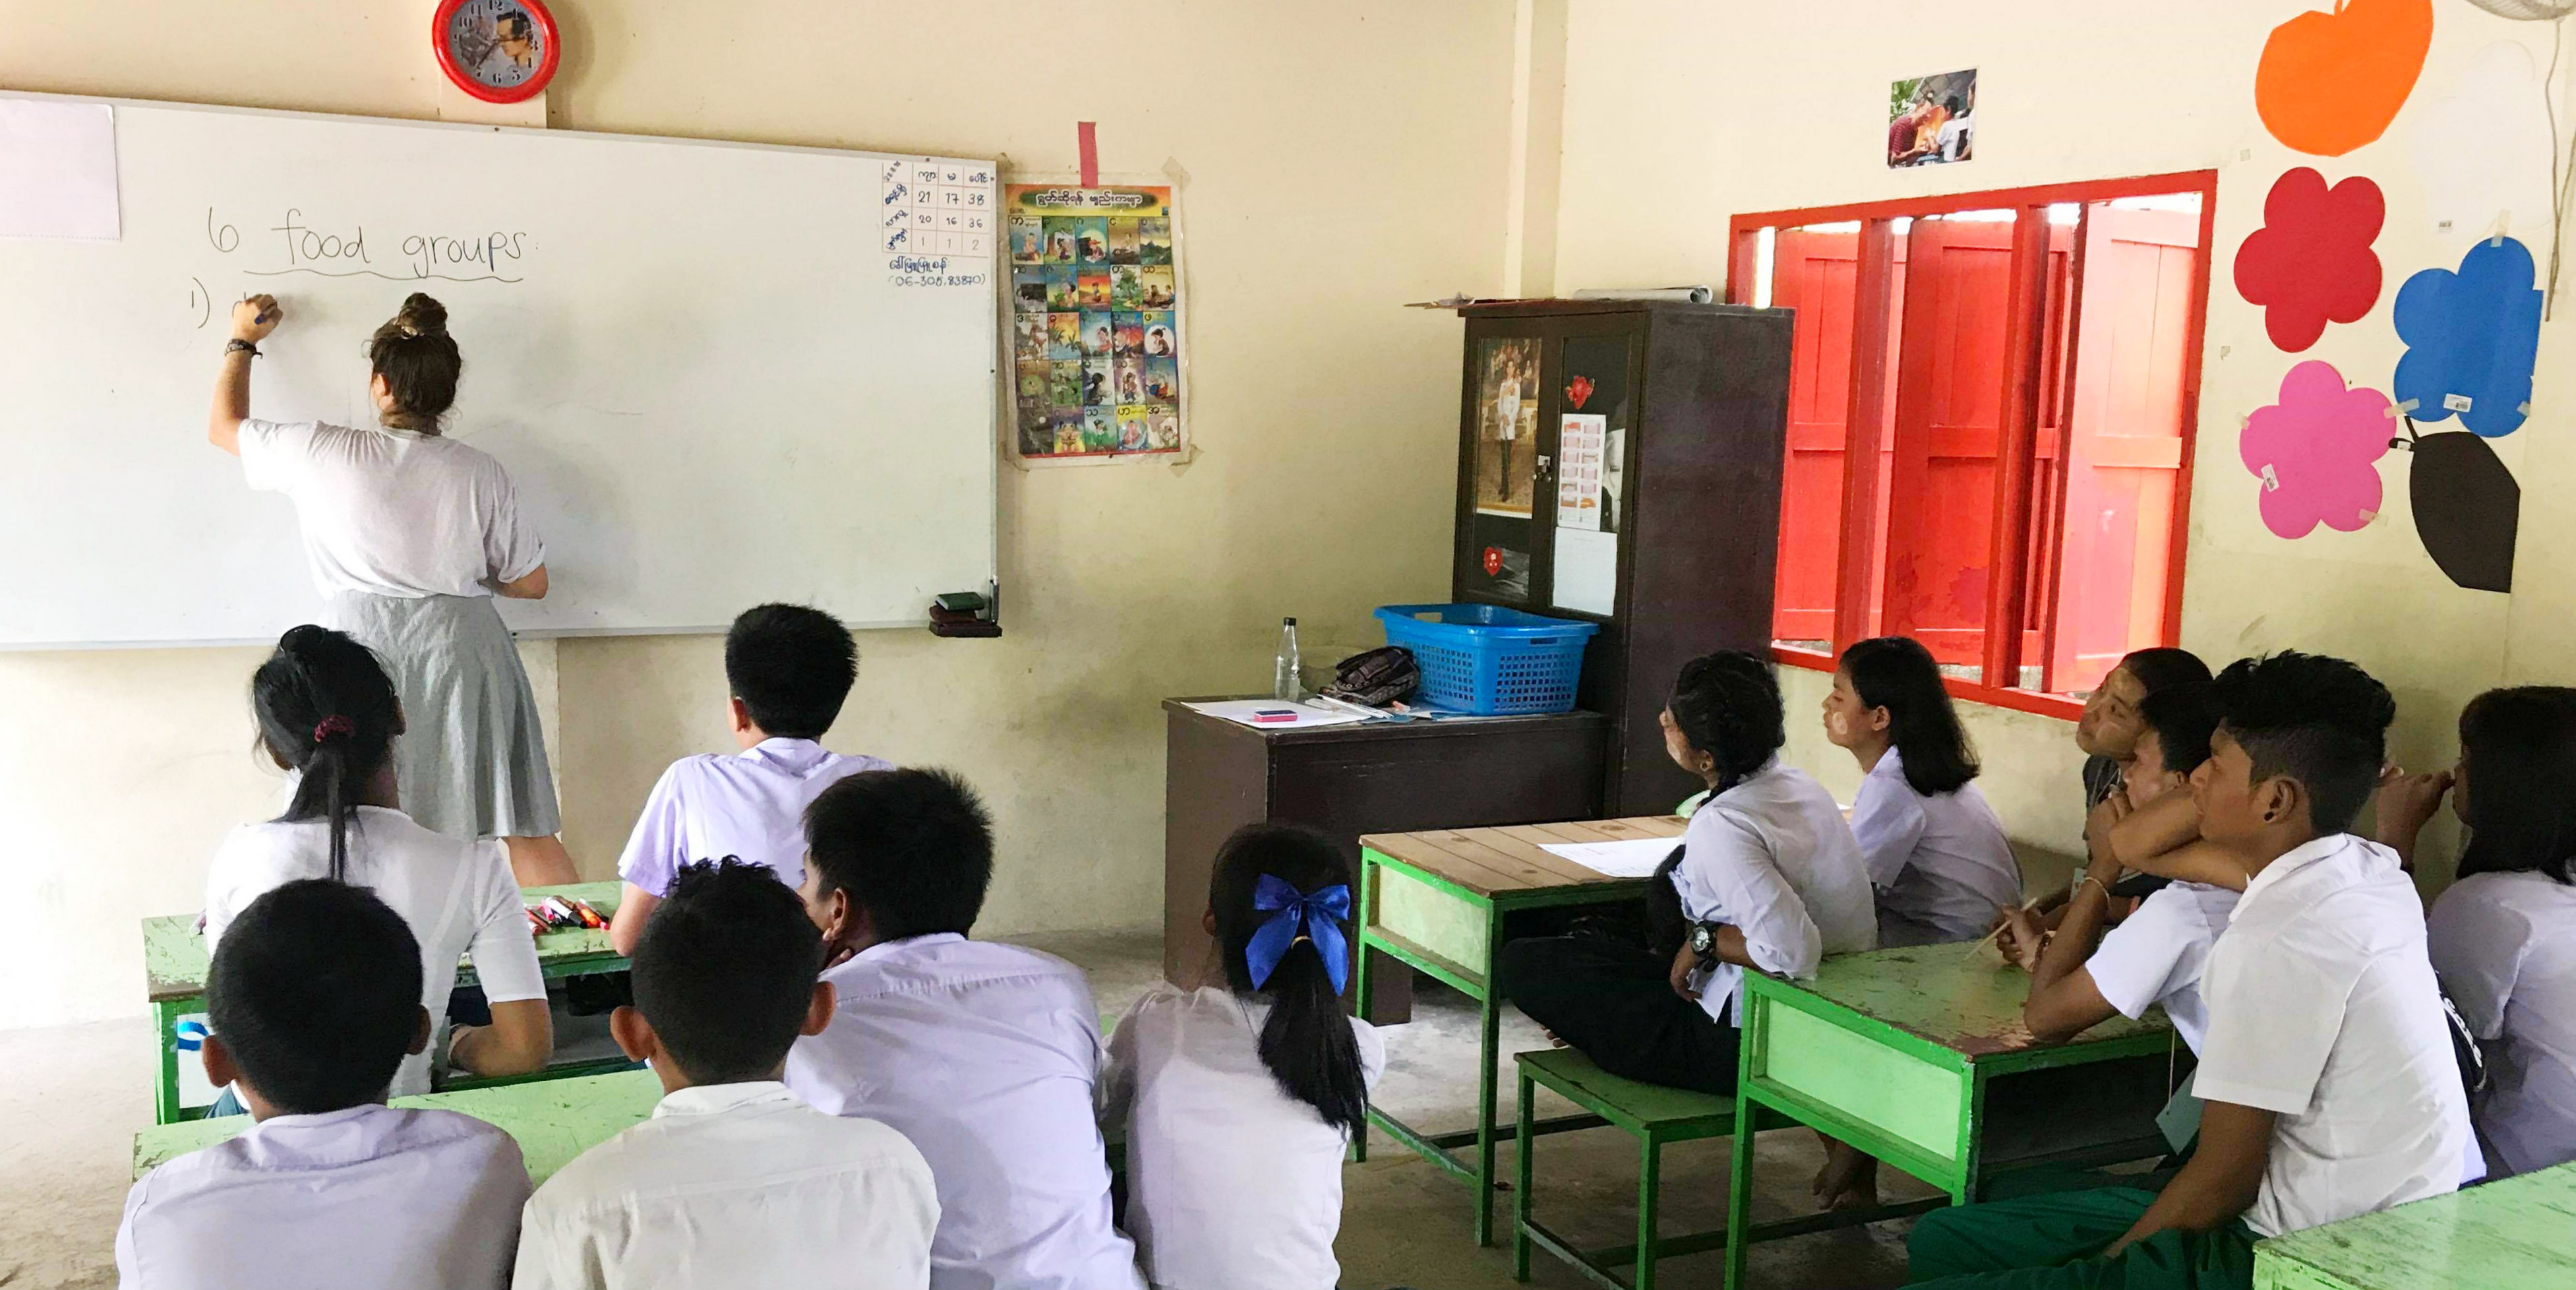 A TEFL trained teacher leads a lesson on food groups in Thailand.